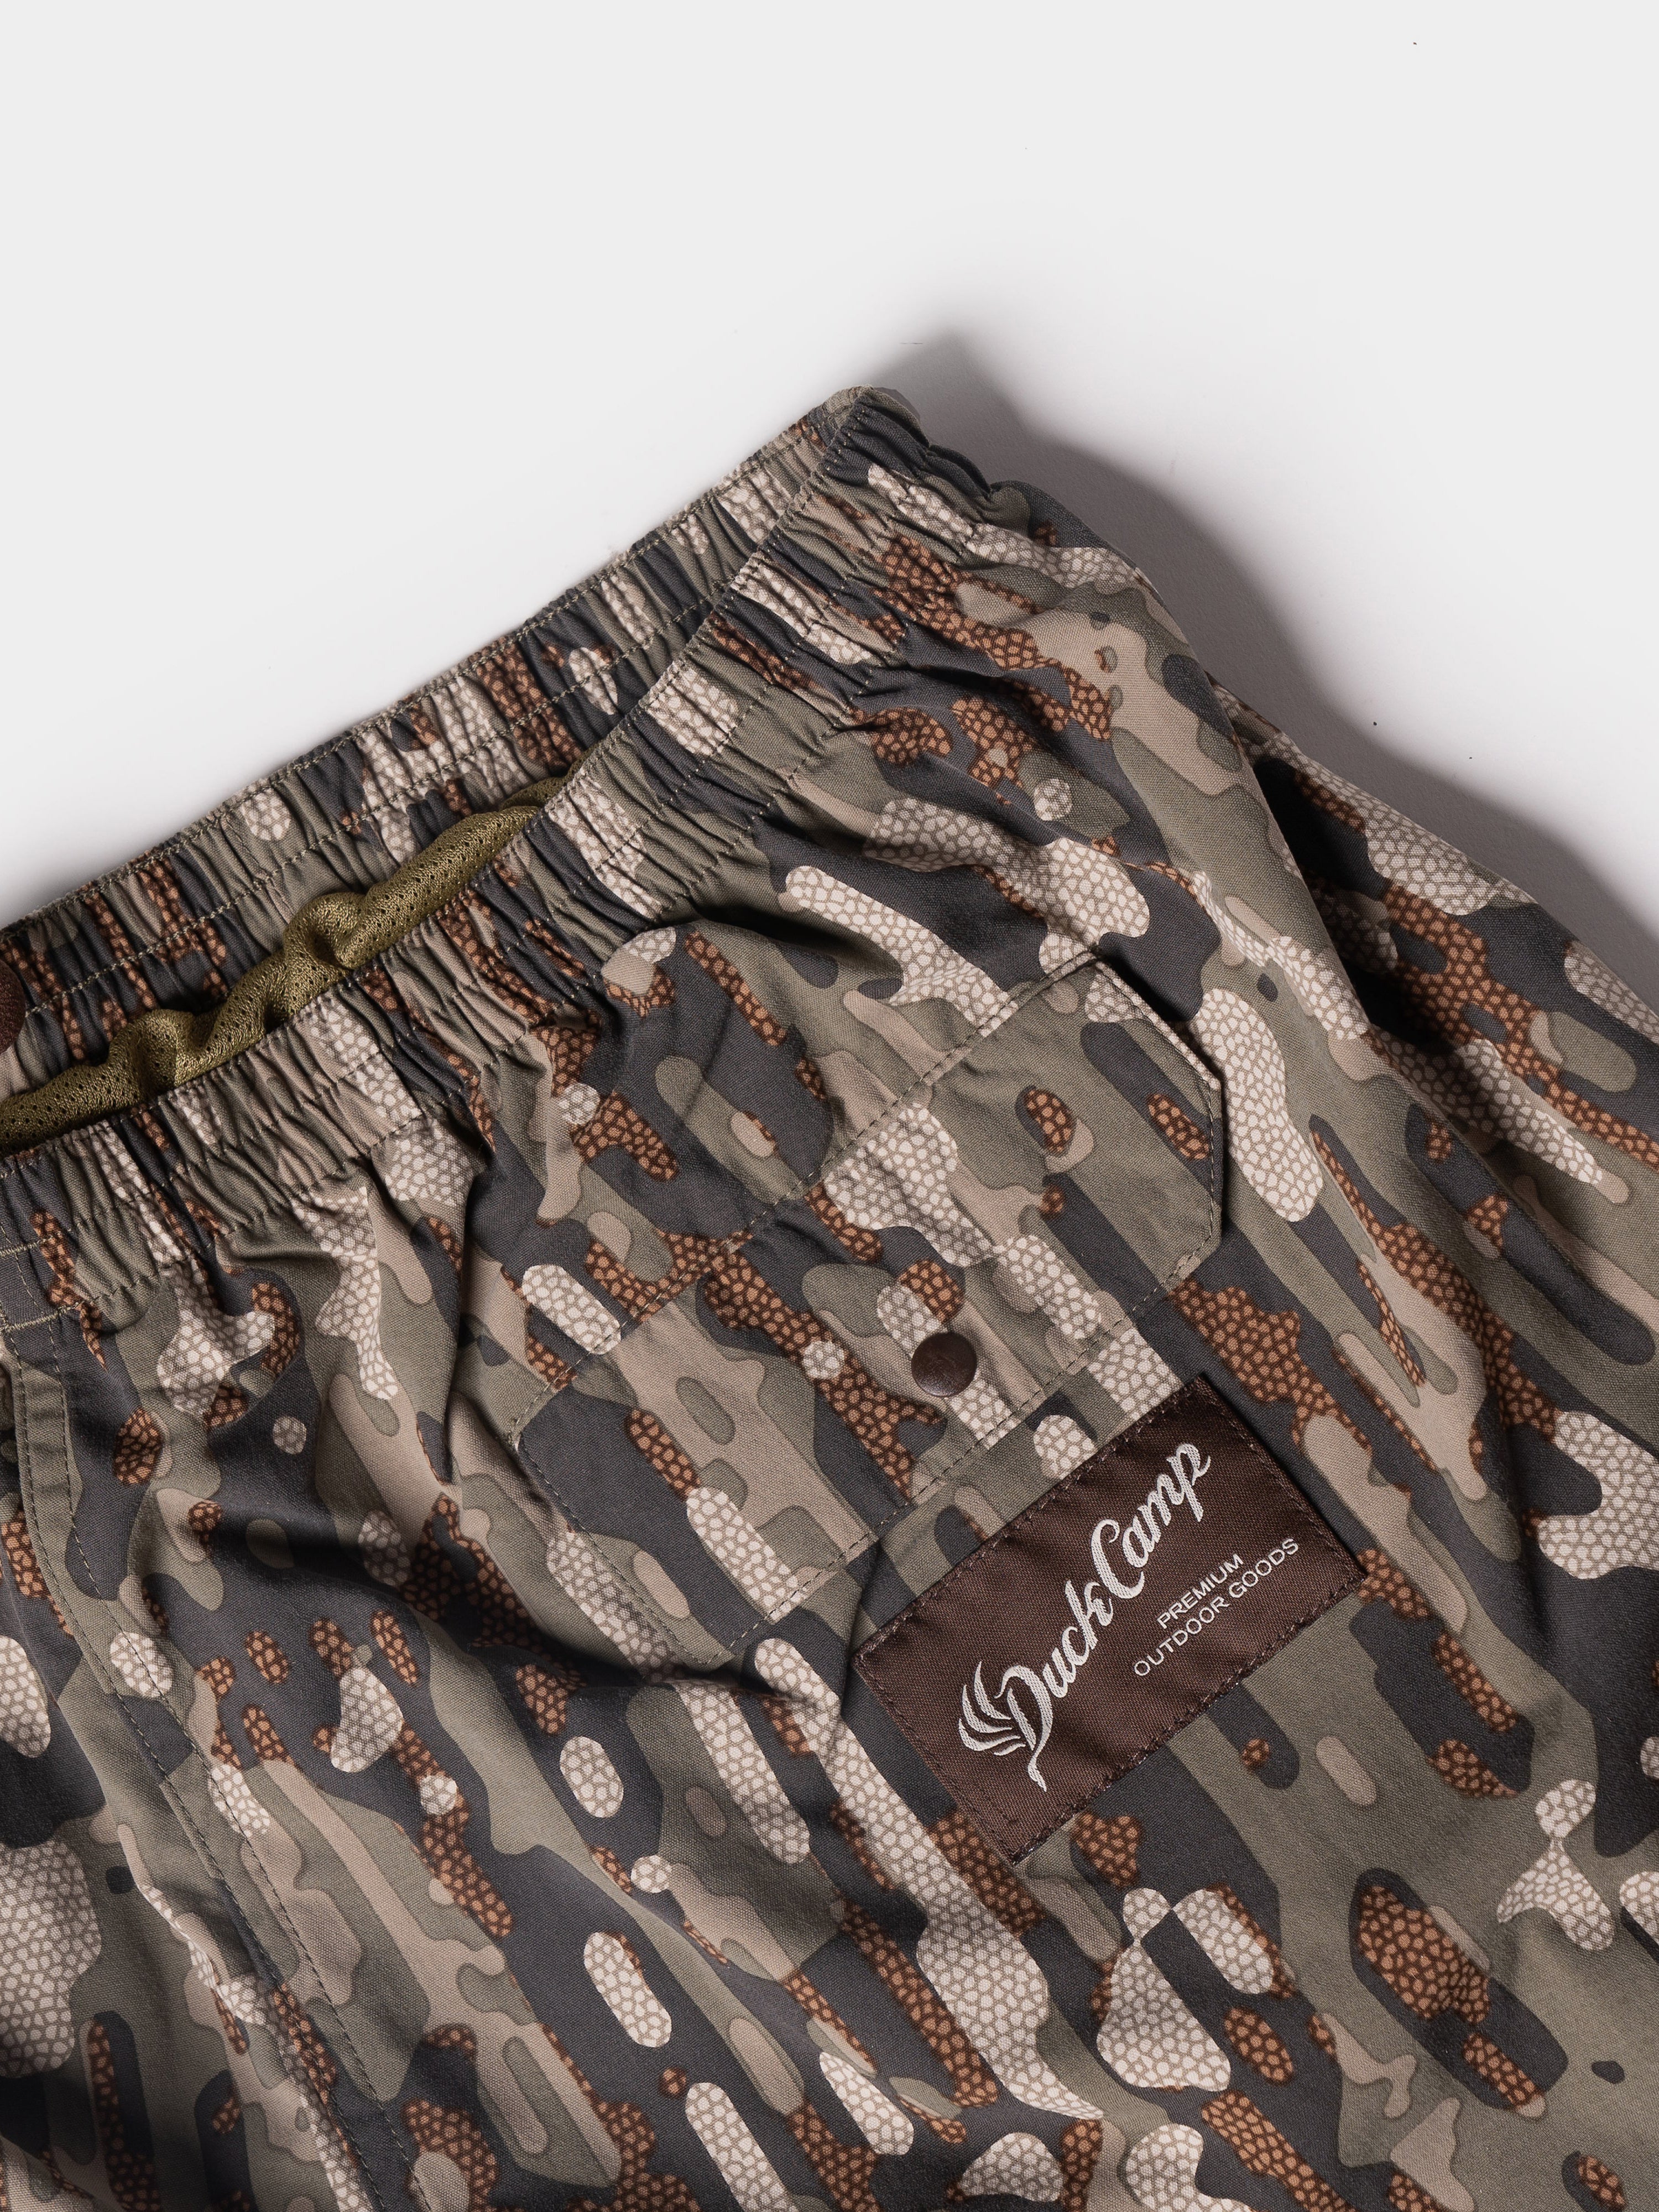 Scout Shorts 5